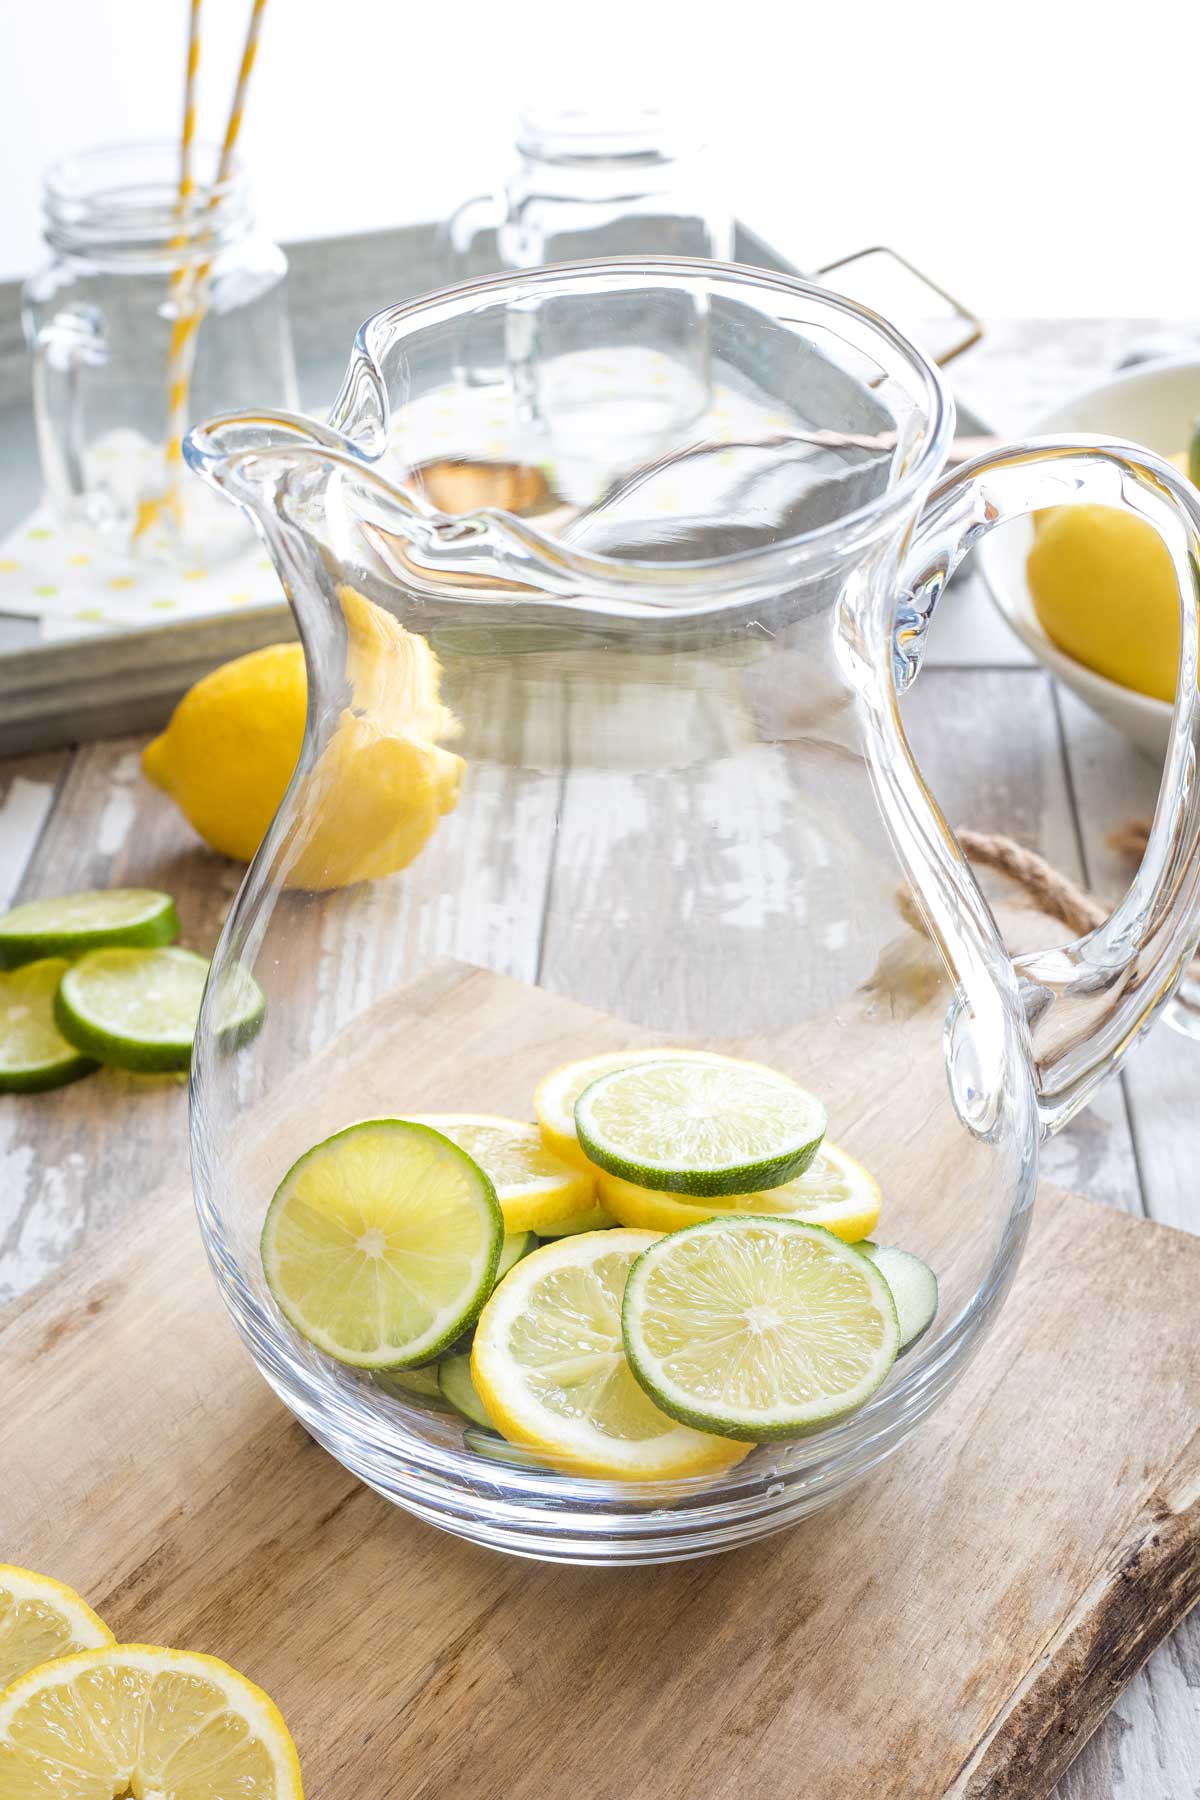 Water pitcher on cutting board, with lemon, lime and cucumber slices in bottom before water is added.